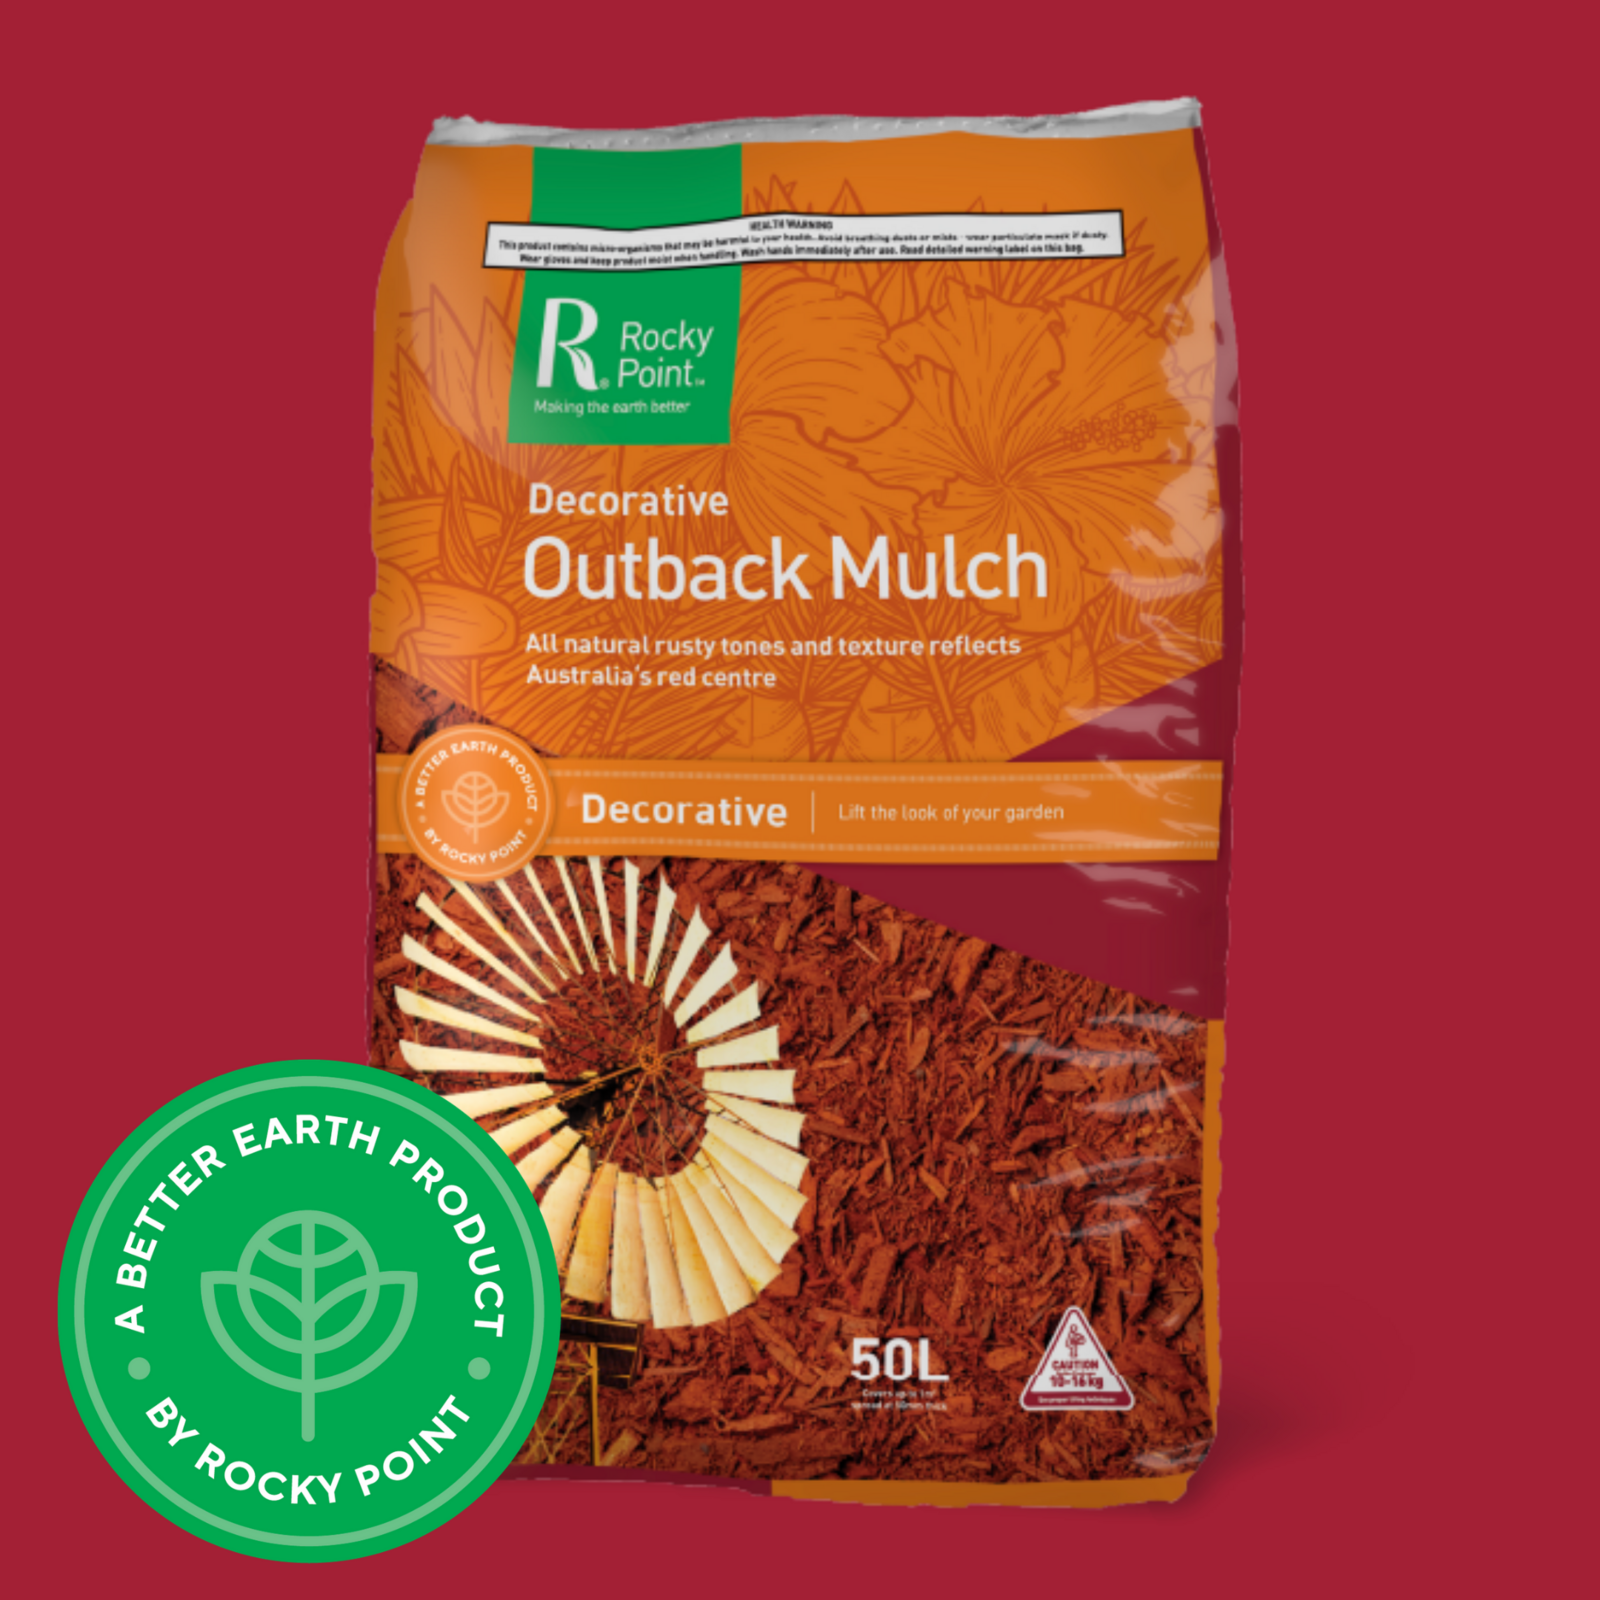 Buy bamboo. Buy Rocky Point Outback Mulch.